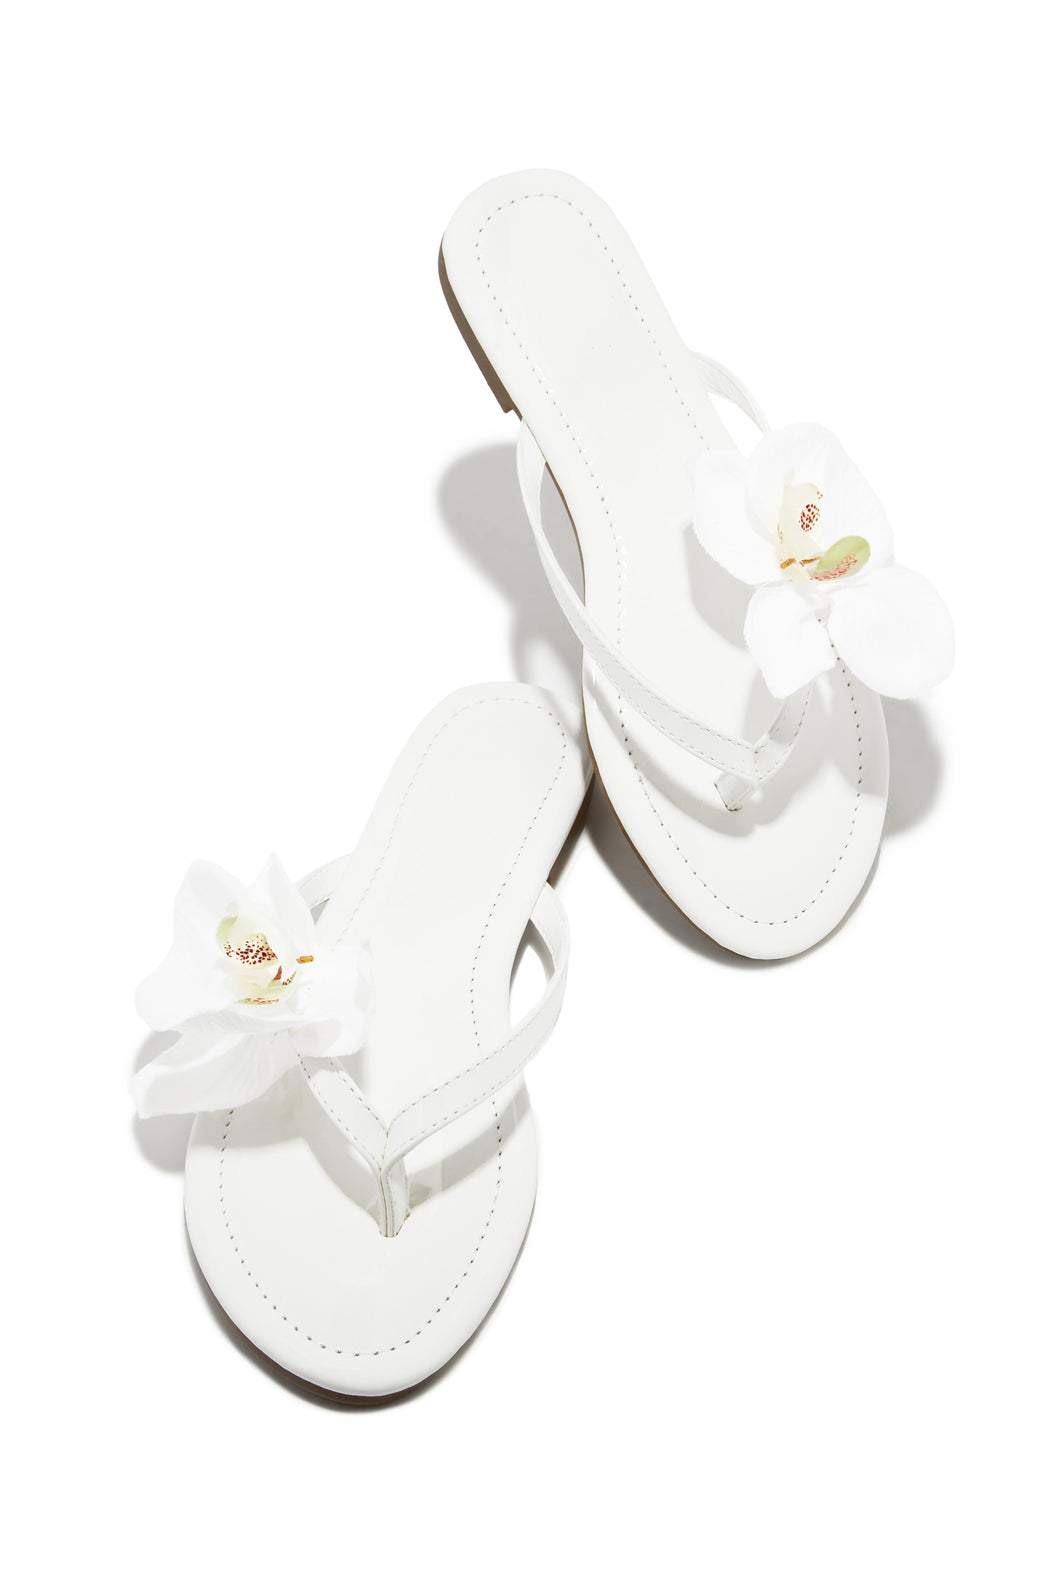 White Slip On Thong Sandals with Flower Strap Detailing